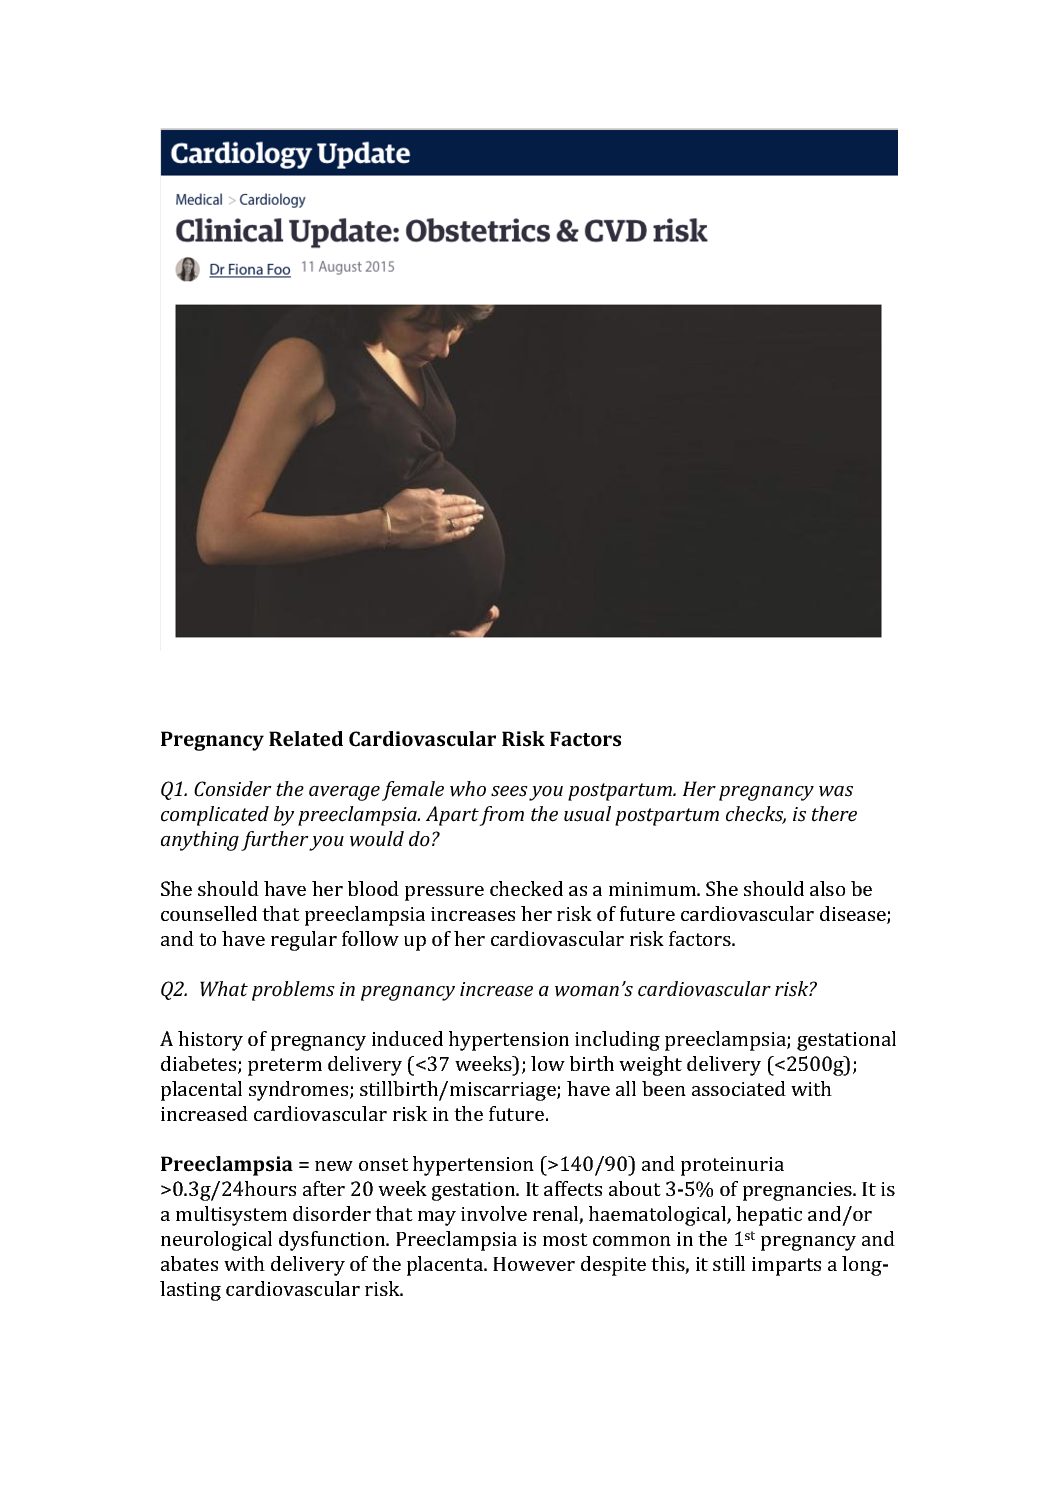 Pregnancy Related Cardiovascular Risk Factors